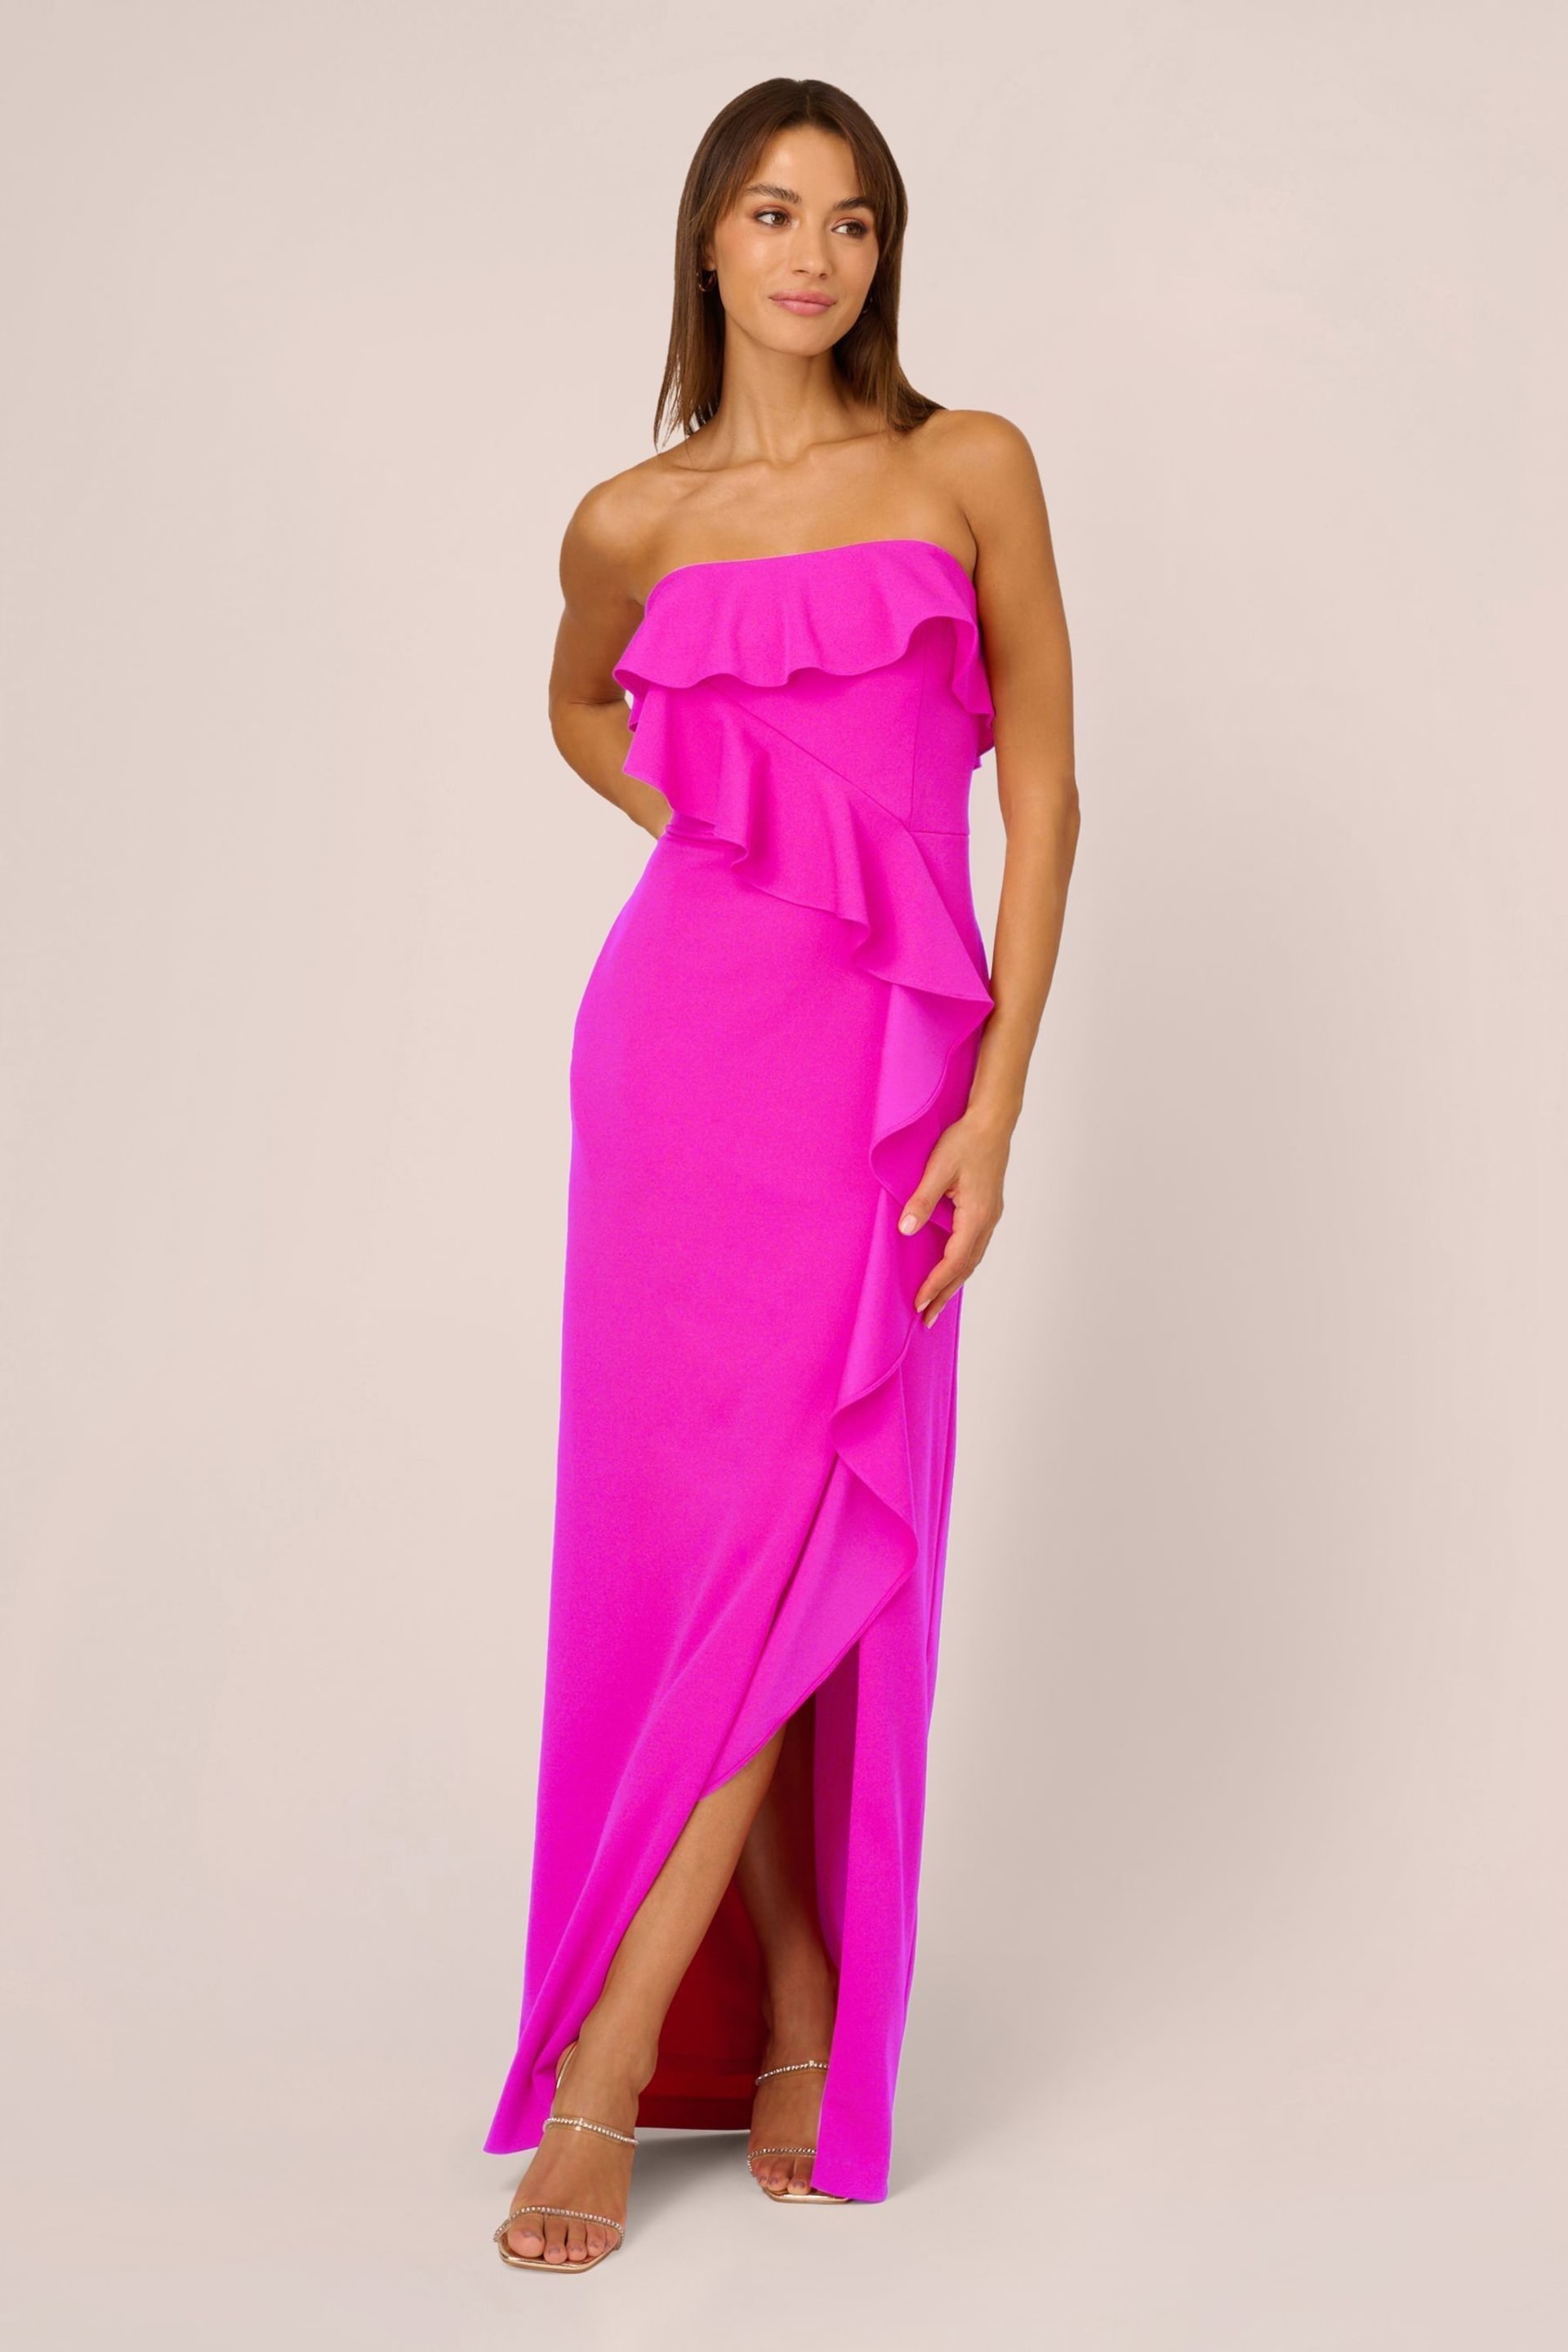 Adrianna Papell Pink Stretch Crepe Column Gown - Image 1 of 6